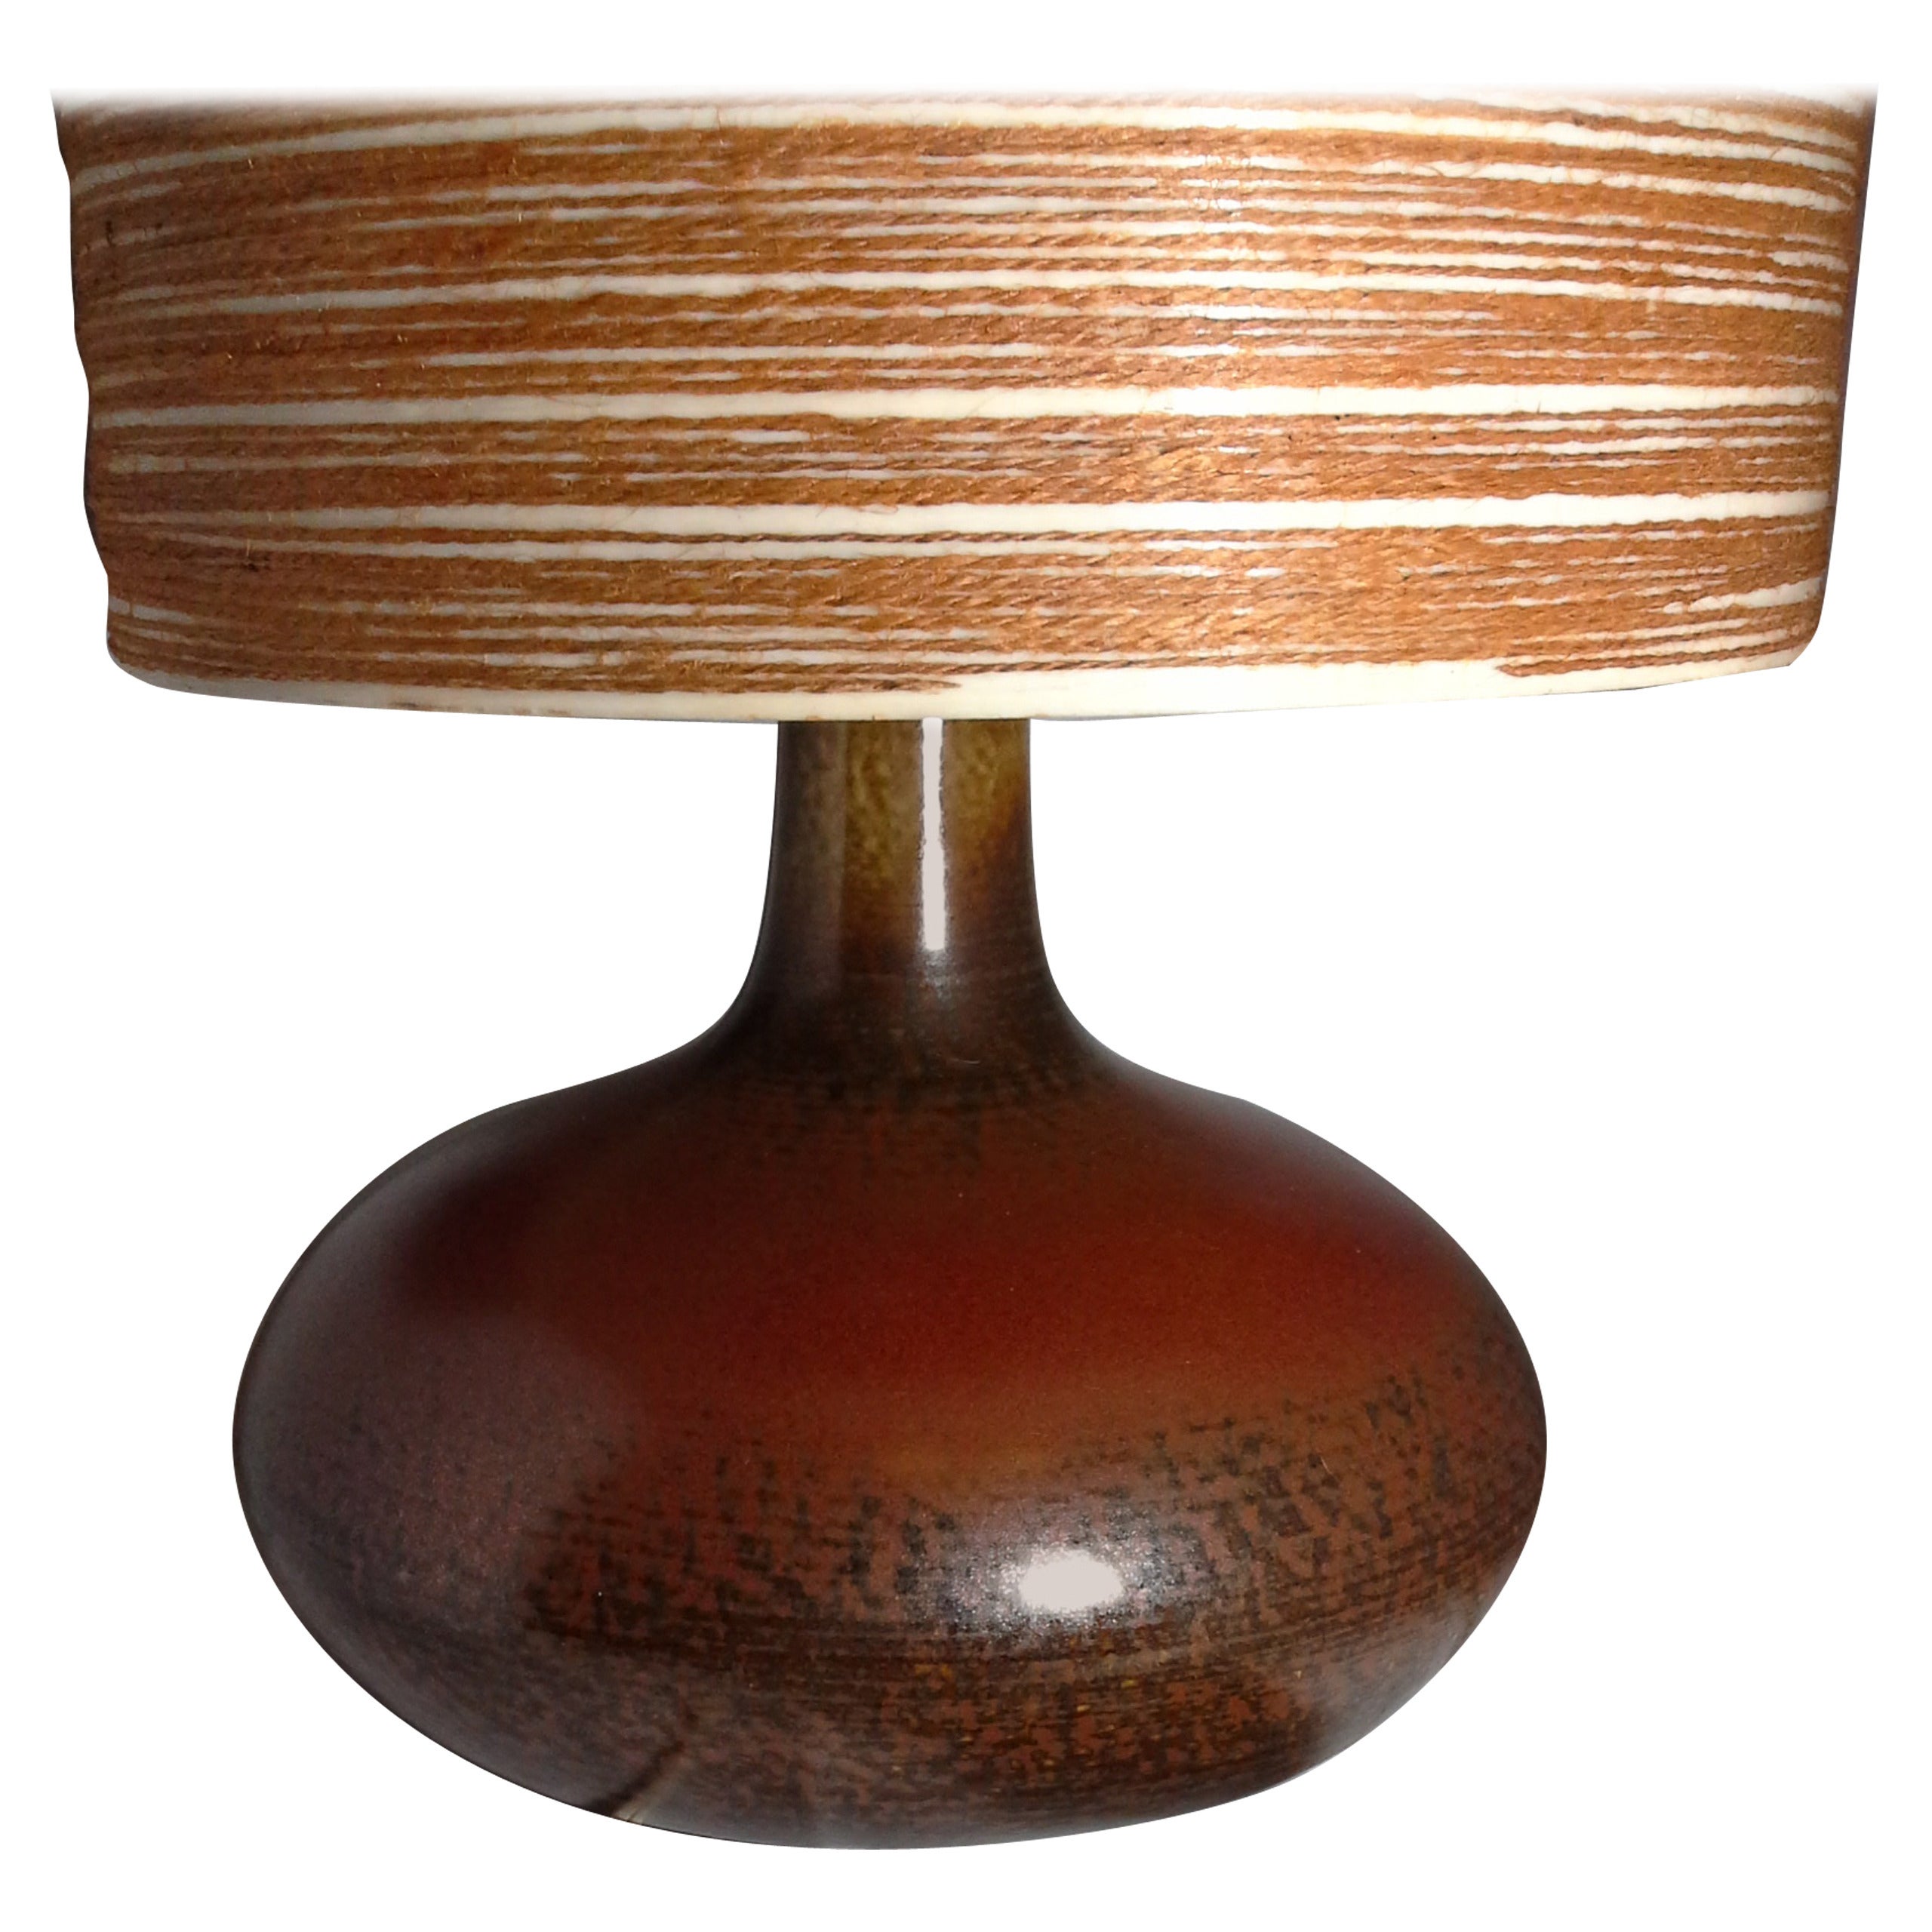 Lotte Mid-Century Ceramic Table Lamp with Original Shade in a Squat Bulbous Form